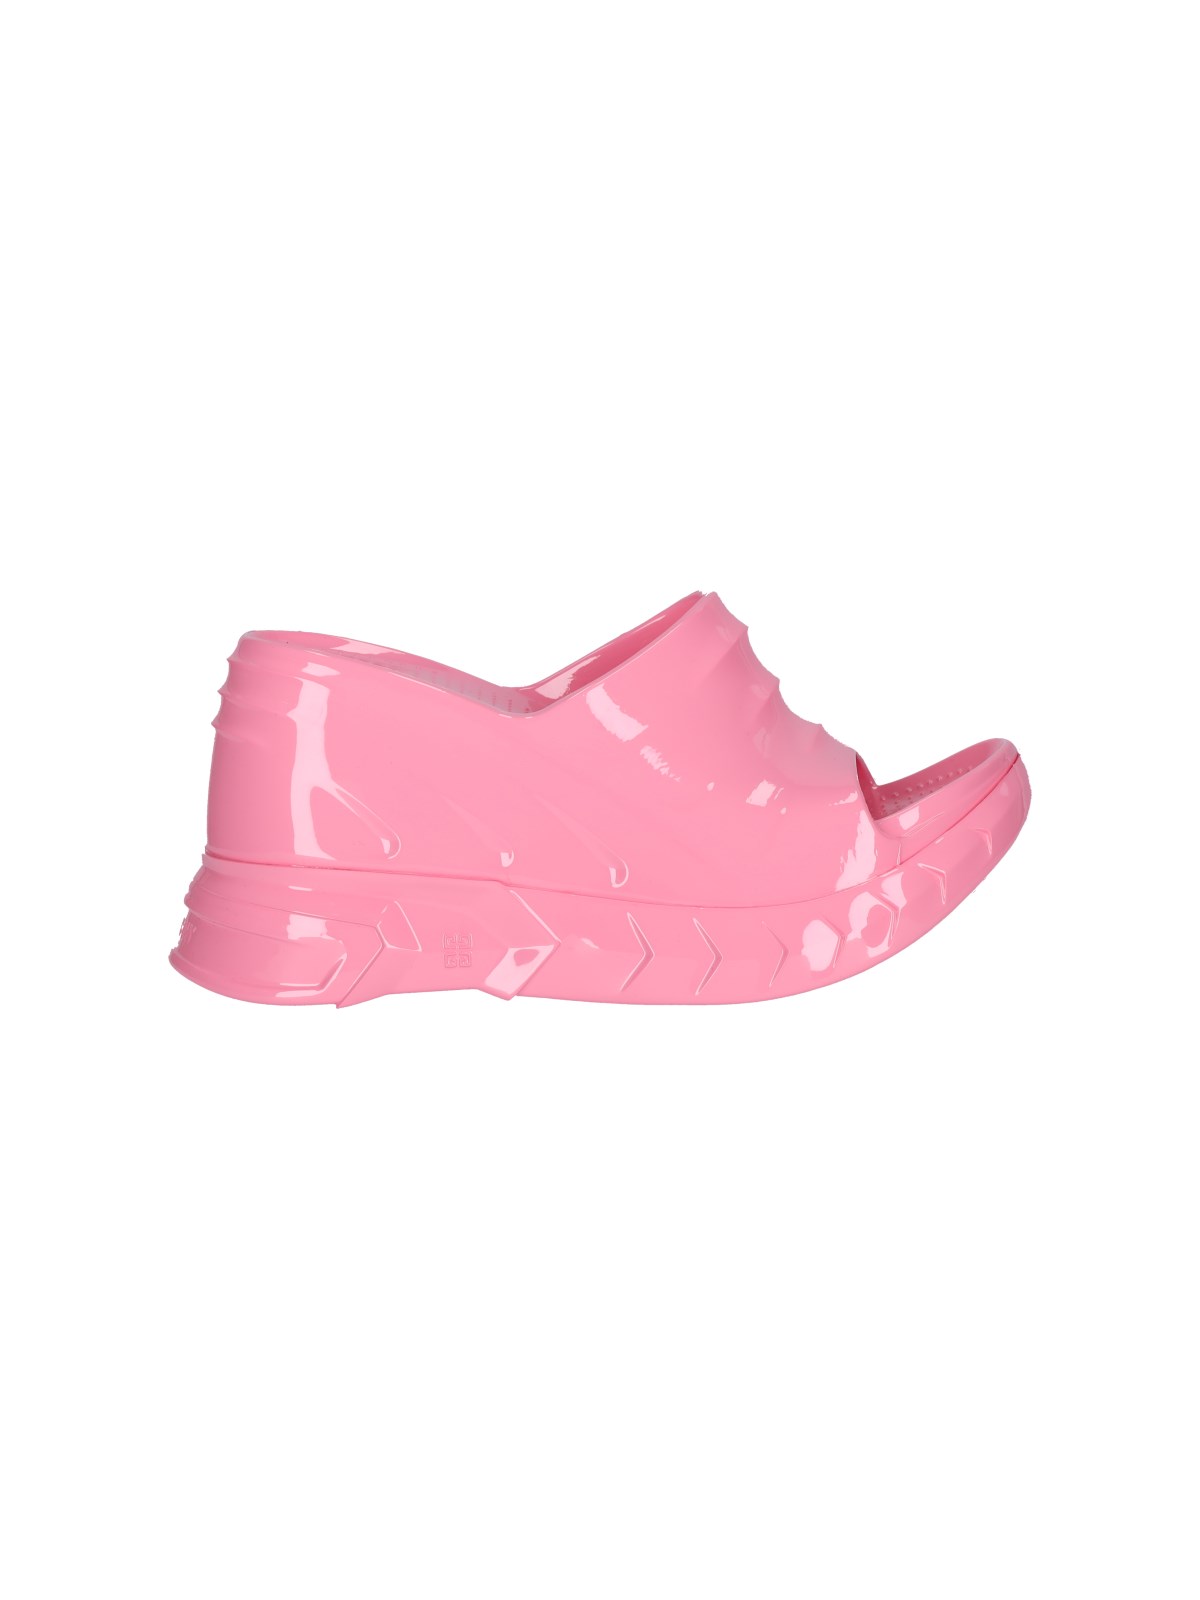 Marshmallow Rubber Wedge Sandals In Pink